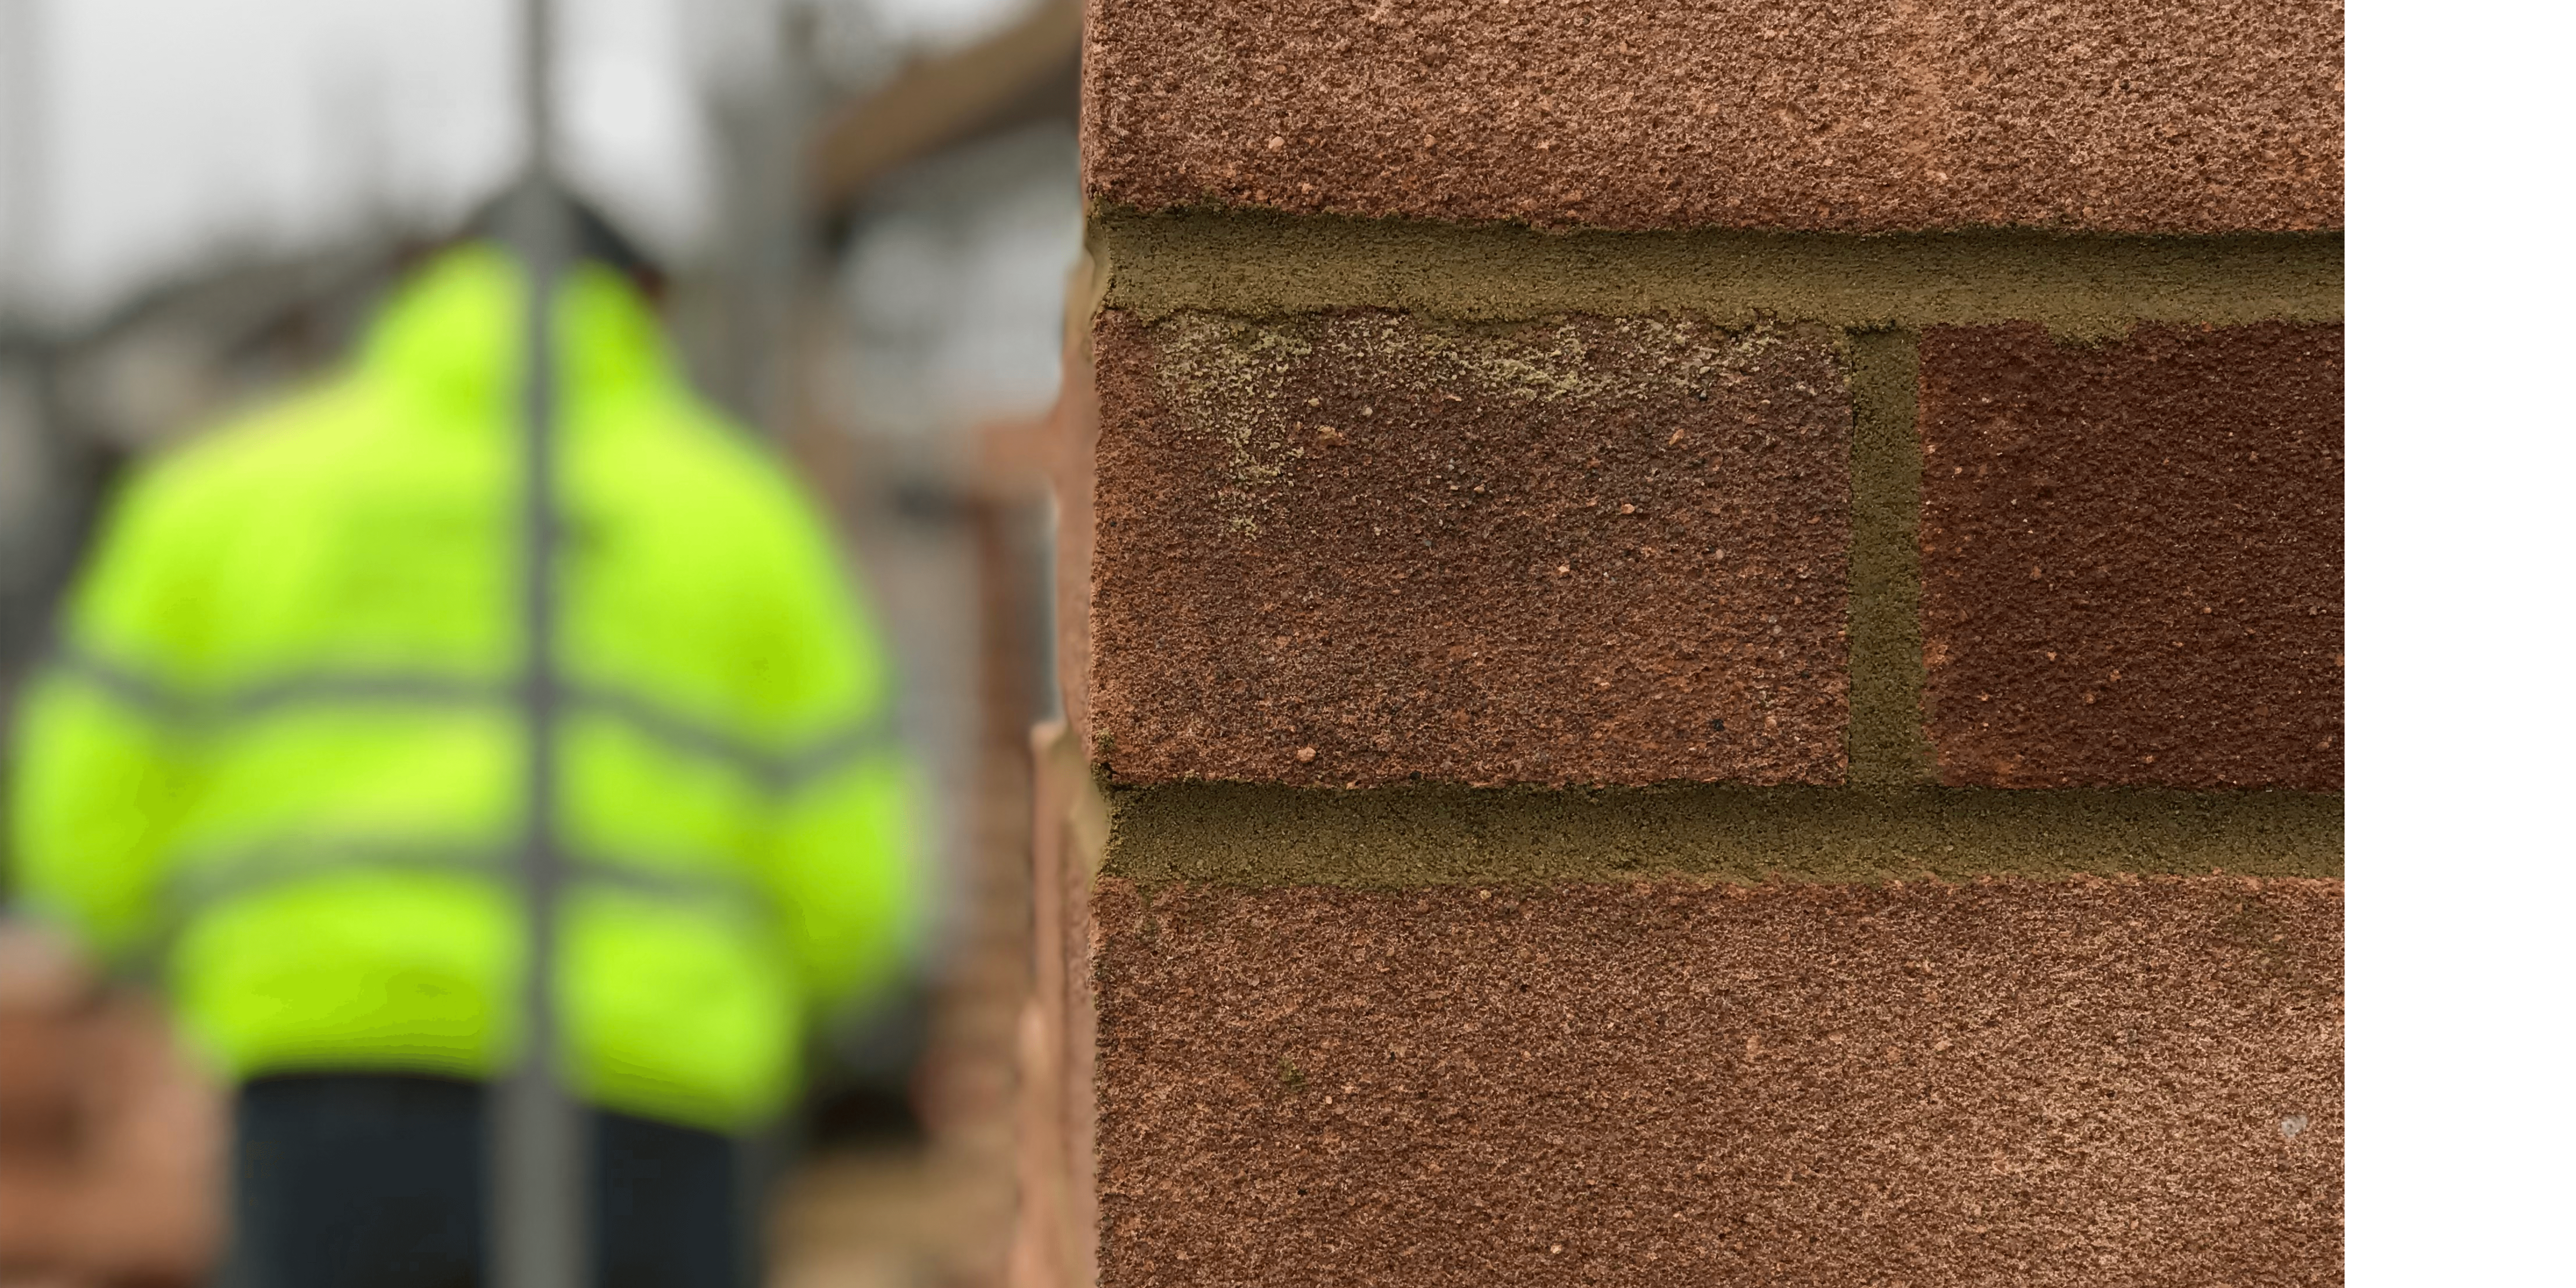 A construction site with a brick wall and a person wearing a yellow high vis jacket